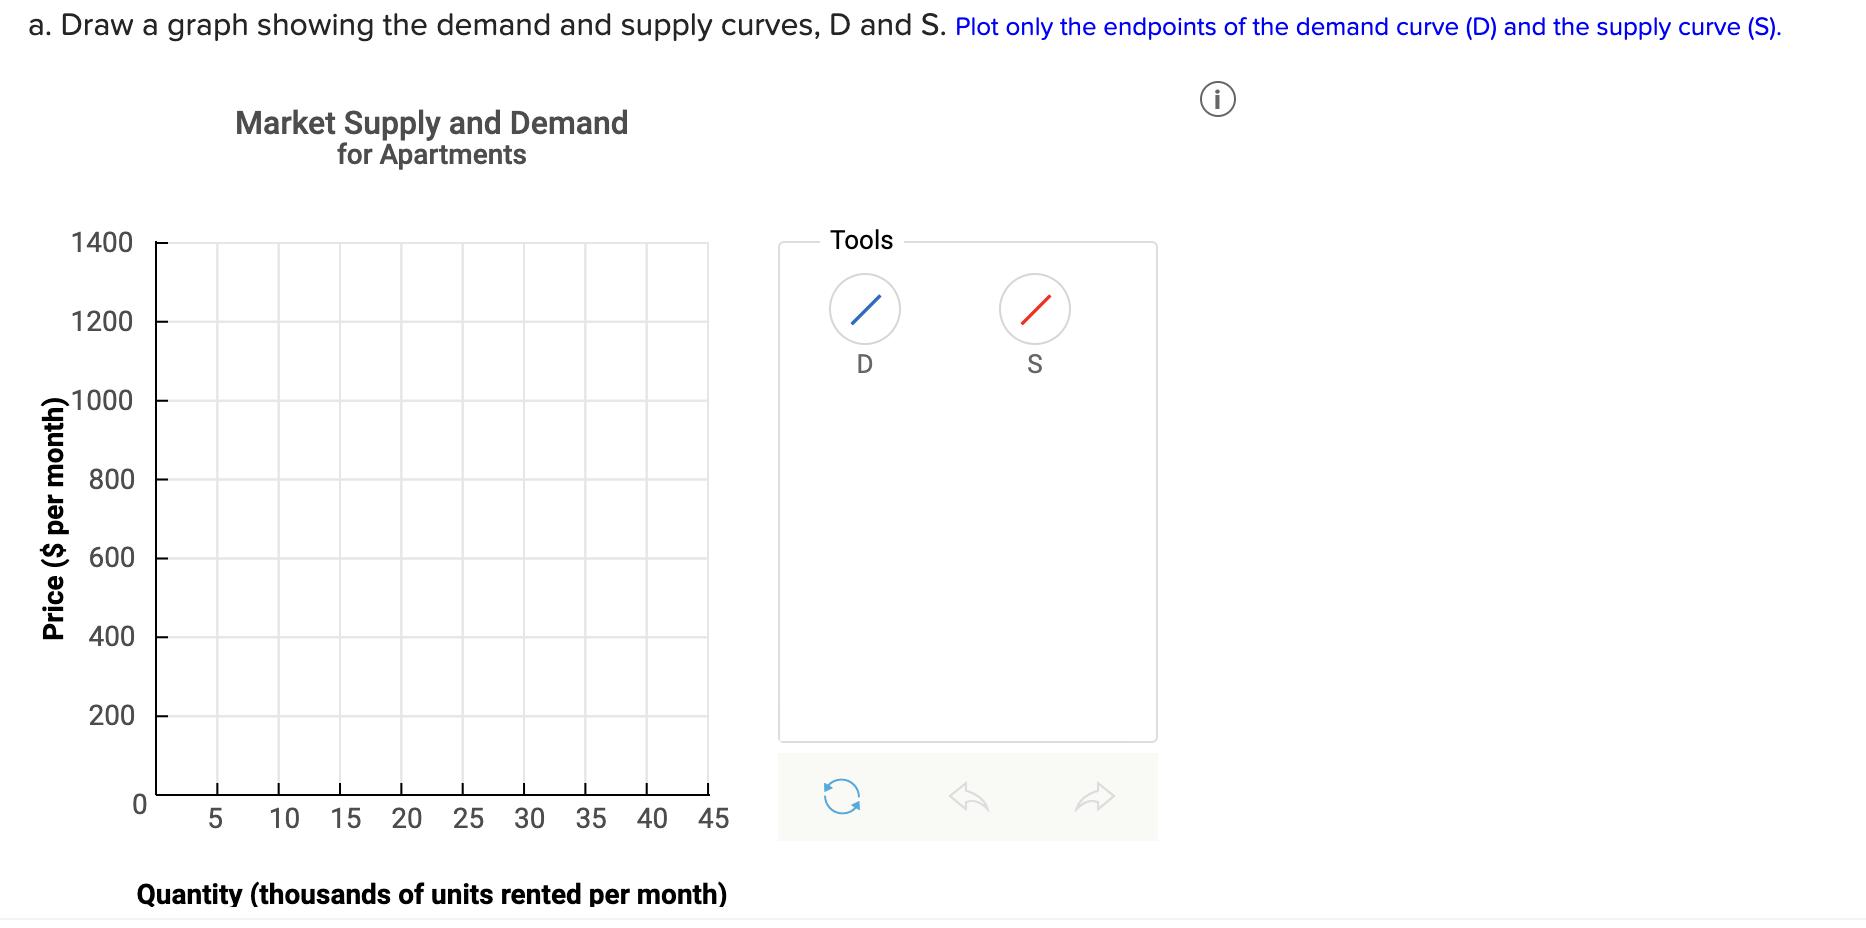 a. Draw a graph showing the demand and supply curves, D and S. Plot only the endpoints of the demand curve